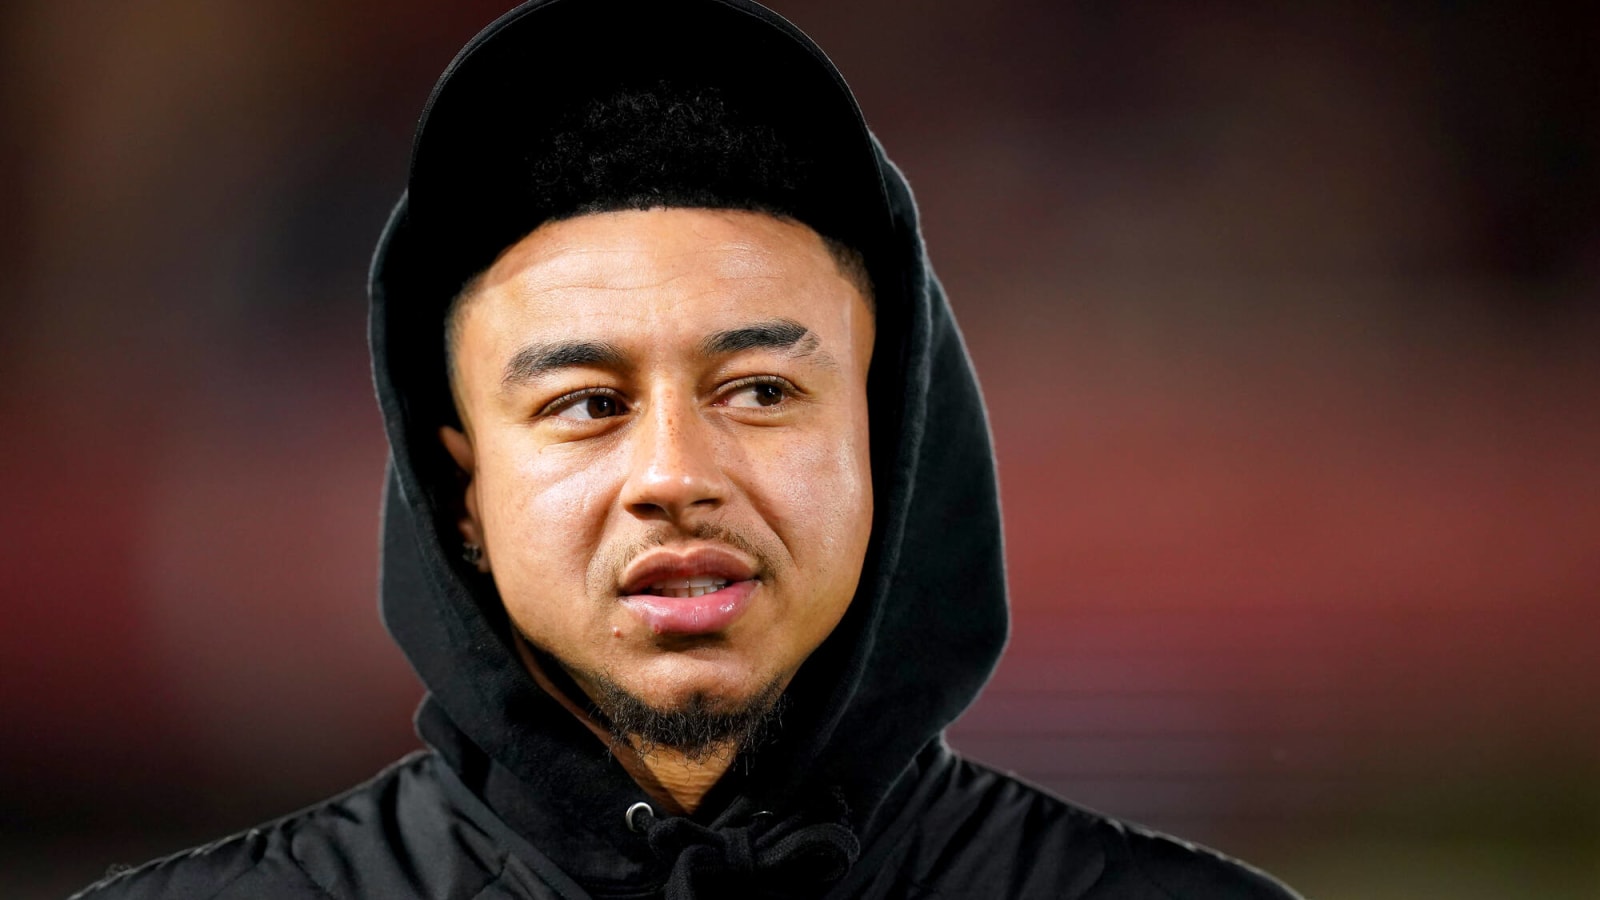 Paul Scholes has come up with a brutal comment on Jesse Lingard’s Instagram post